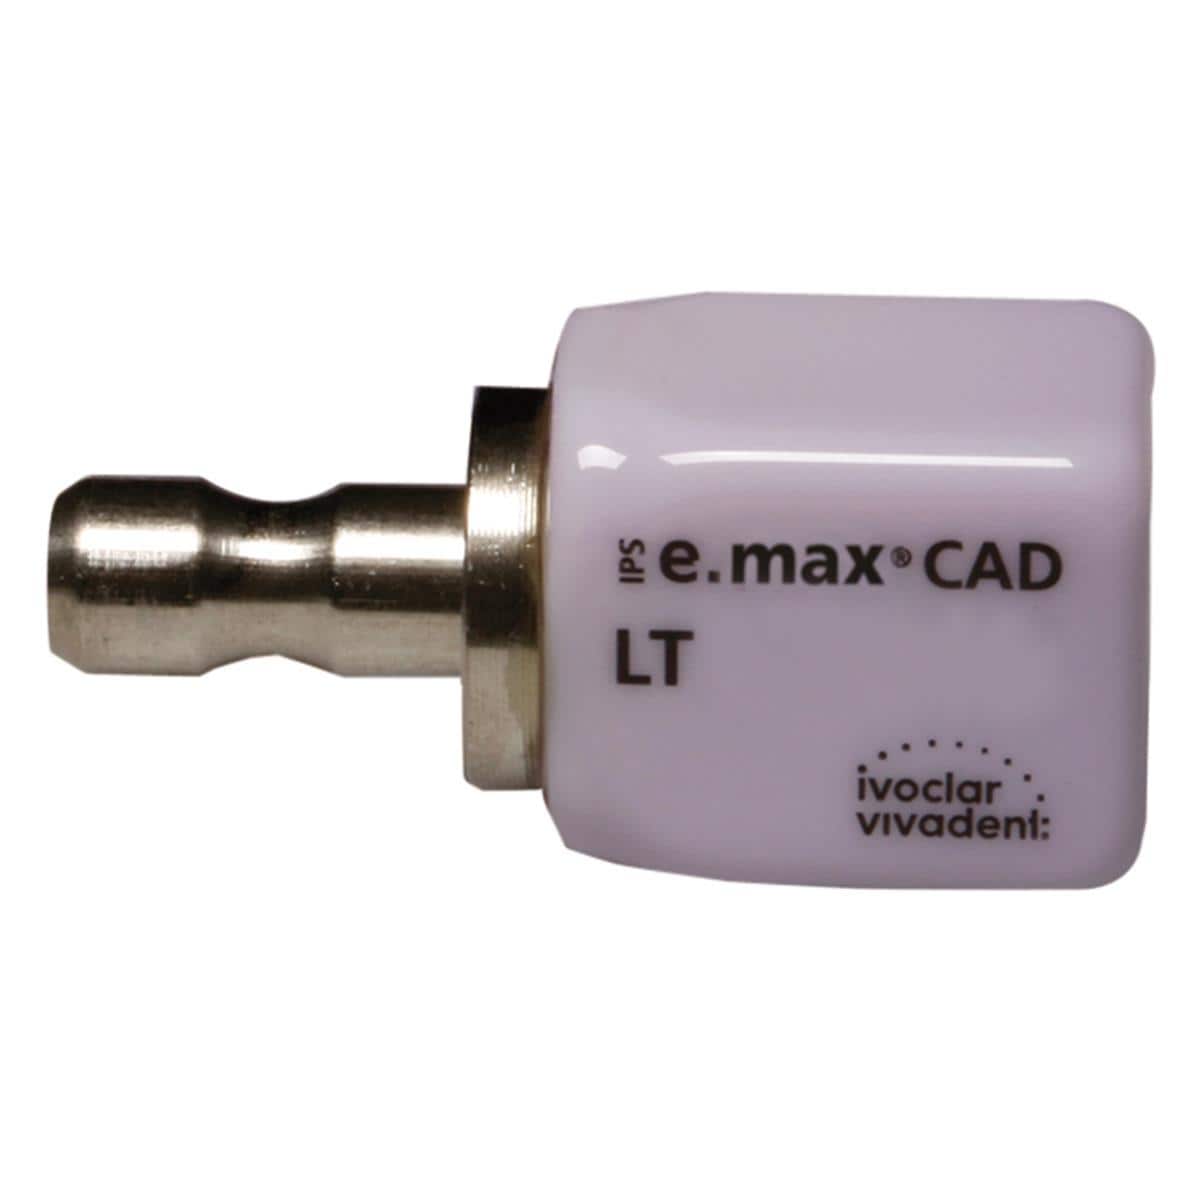 IPS e.max CAD CEREC/inLab (LT) Low Translucency Abutment Shade A1 Size A14 Standard 5pk